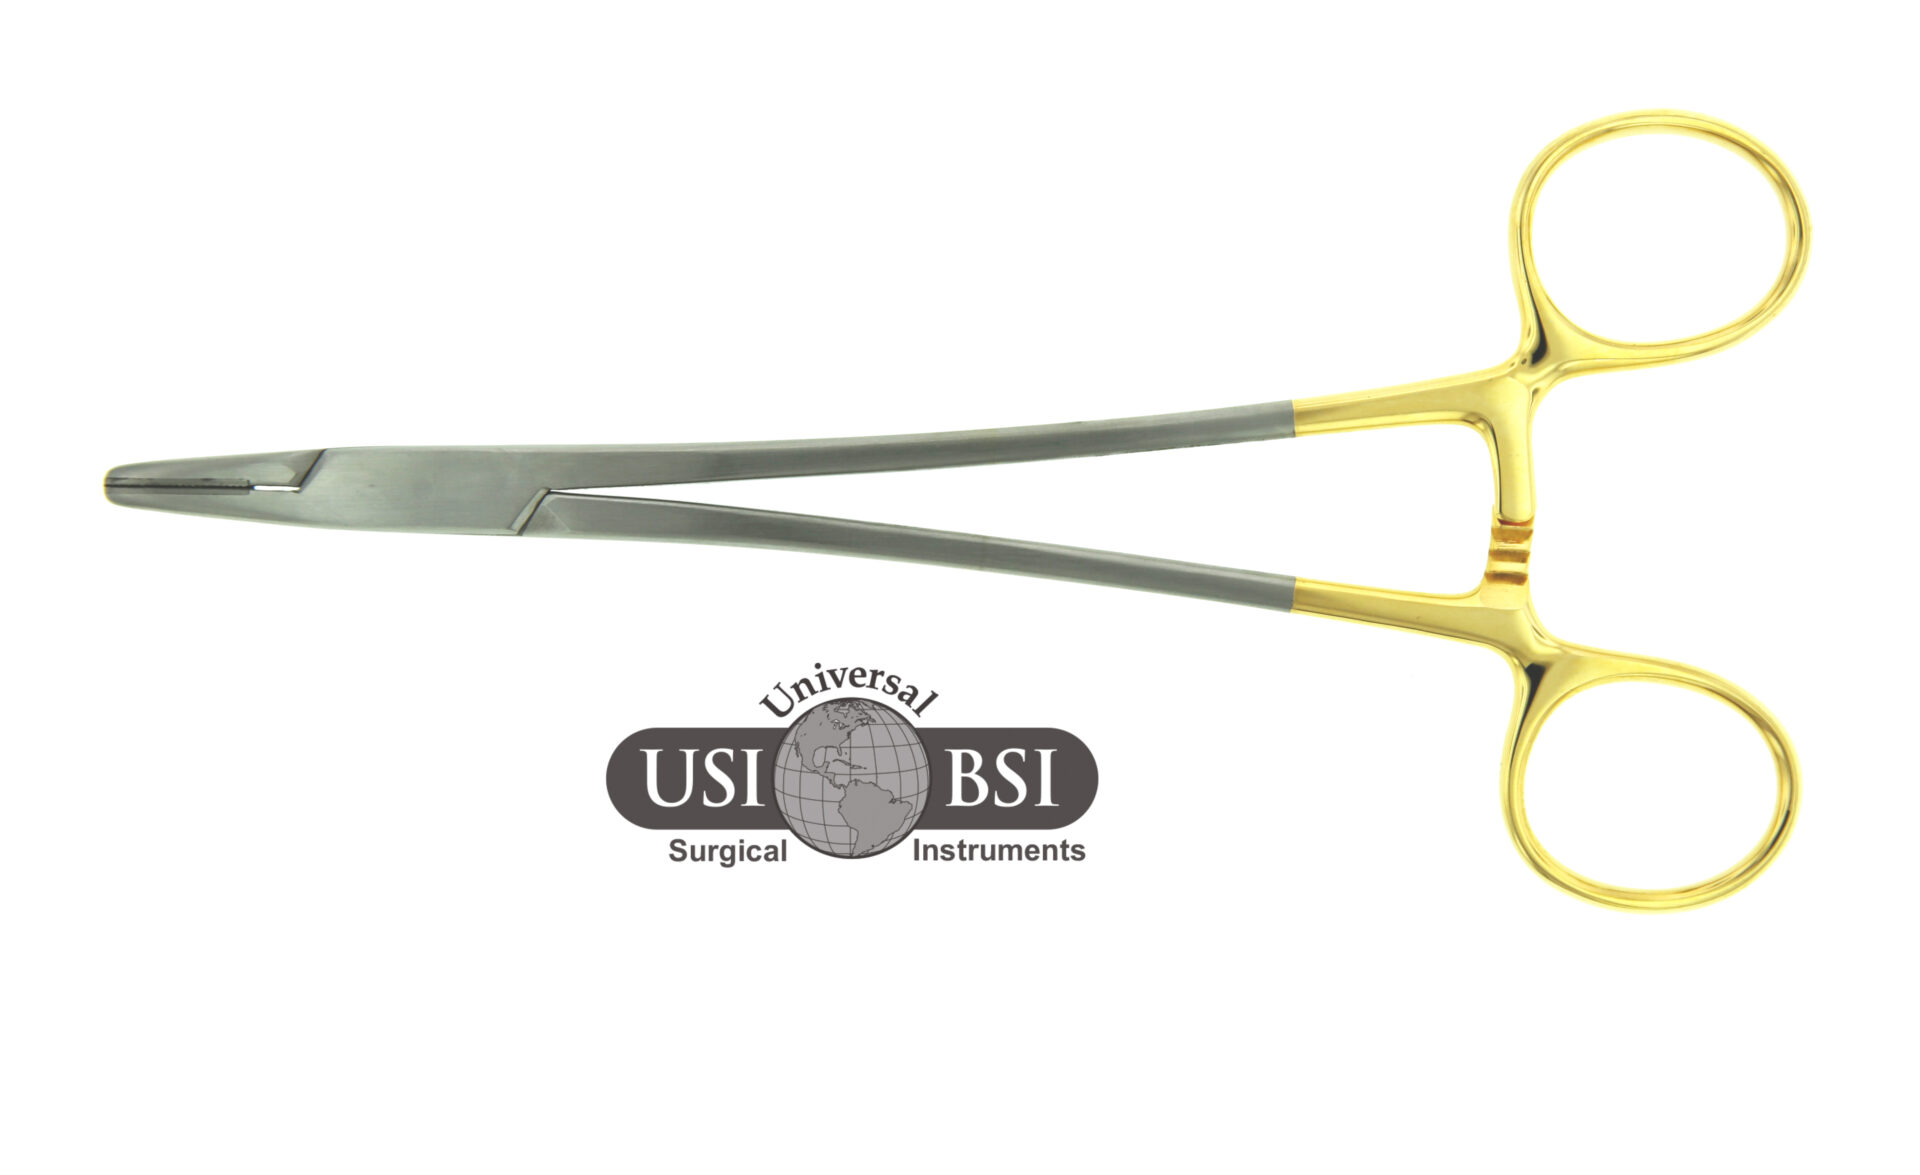 A pair of scissors with yellow handles and grey tips.